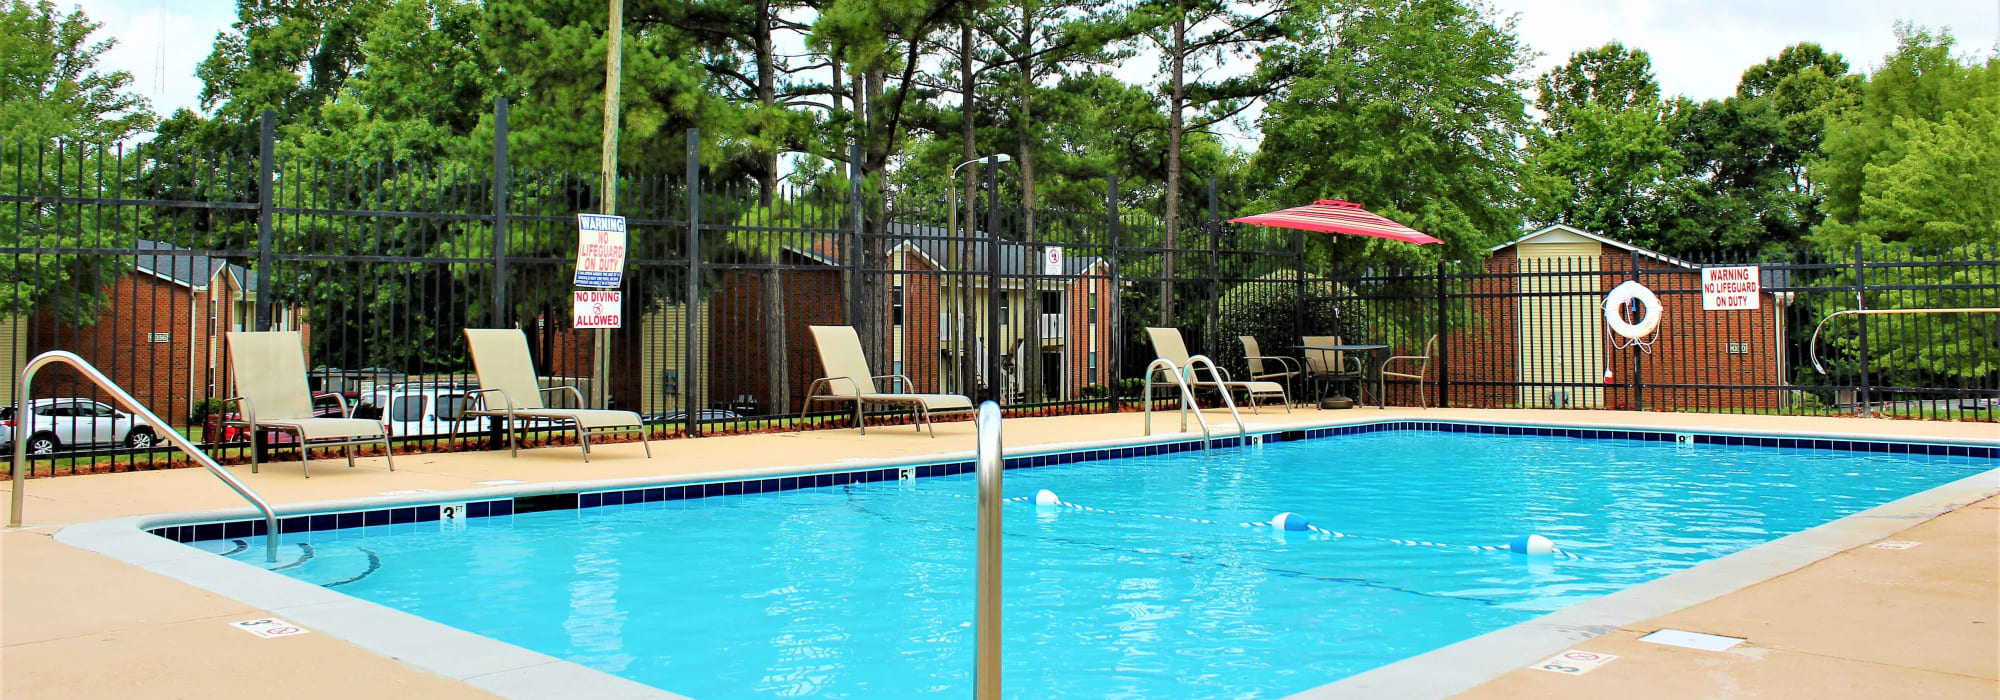 Lounge chairs by the pool at Arborgate Apartments Homes in Charlotte, North Carolina